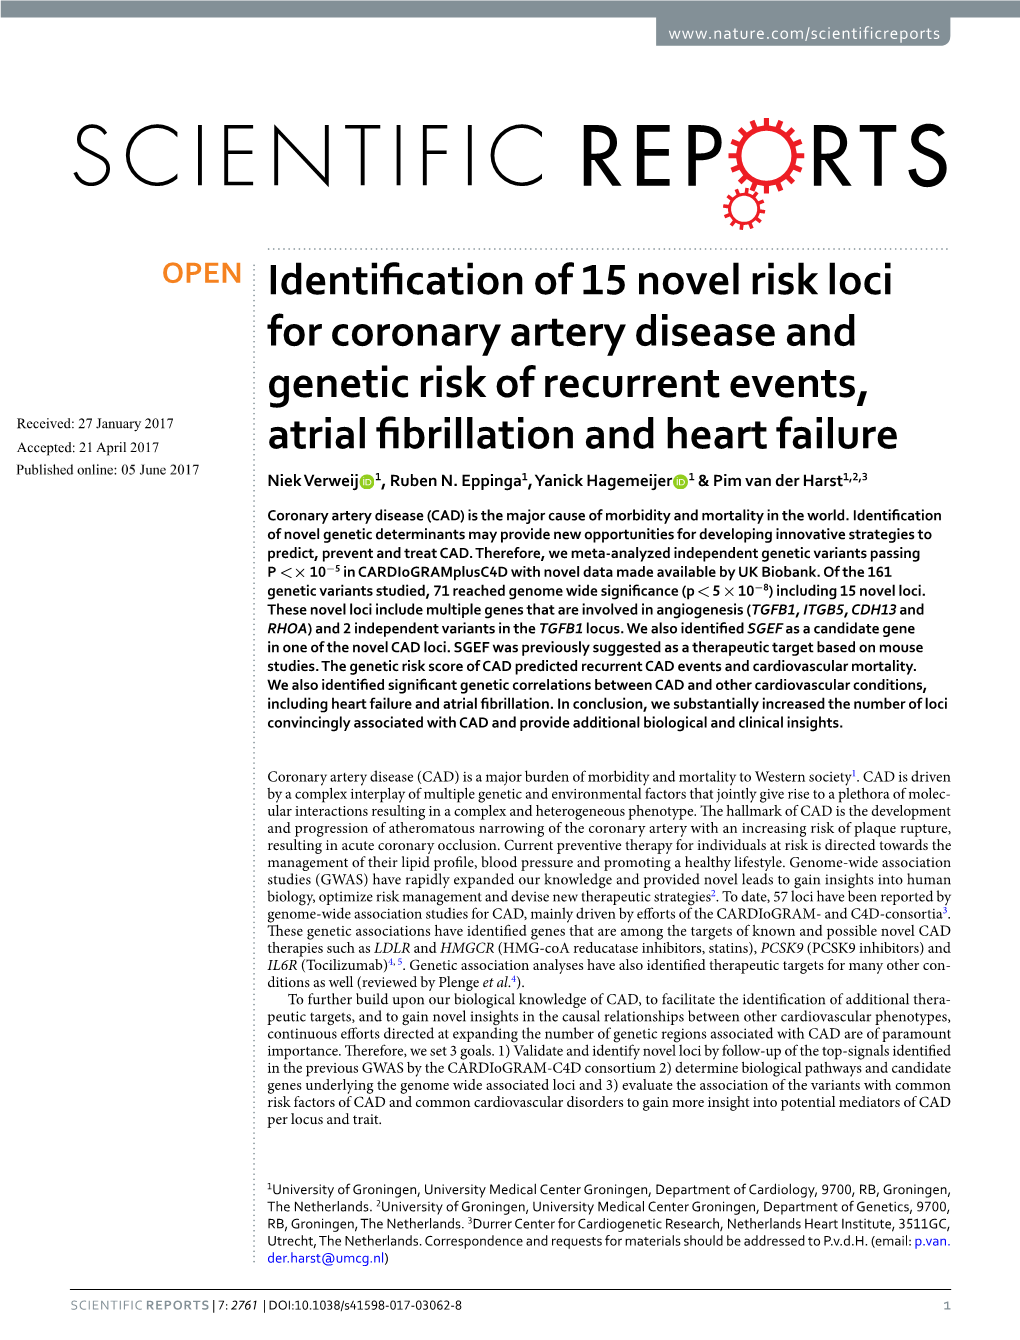 Identification of 15 Novel Risk Loci for Coronary Artery Disease and Genetic